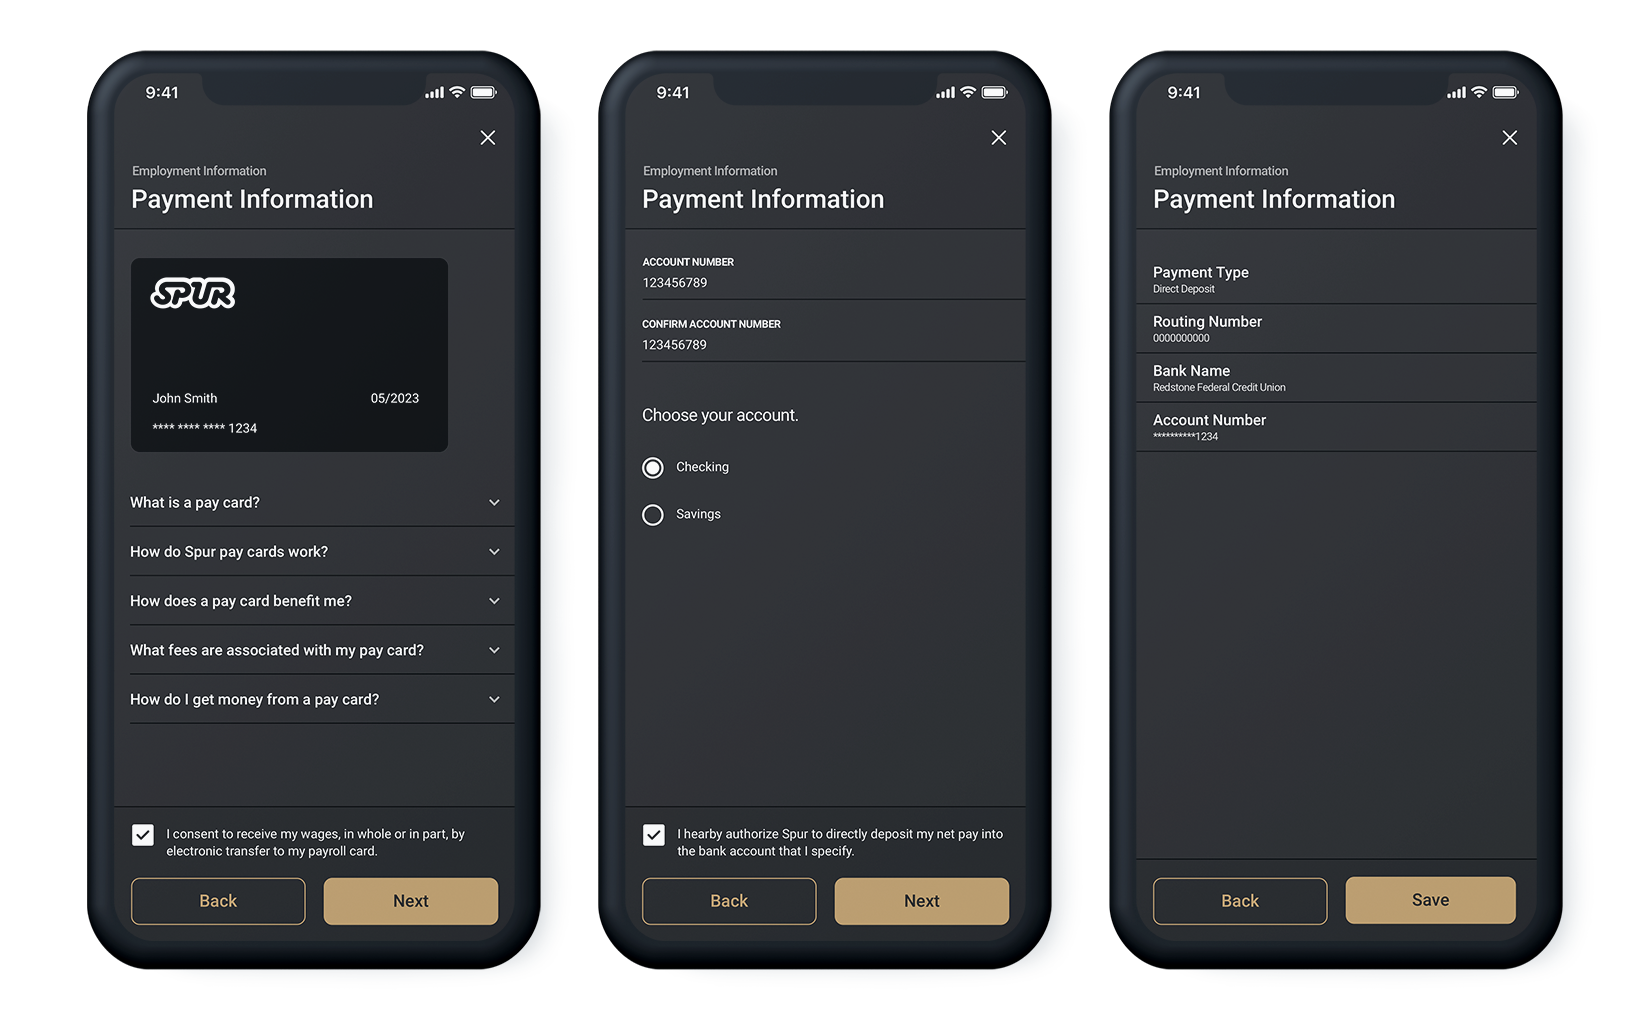 Spur mobile app payment preferences for workers